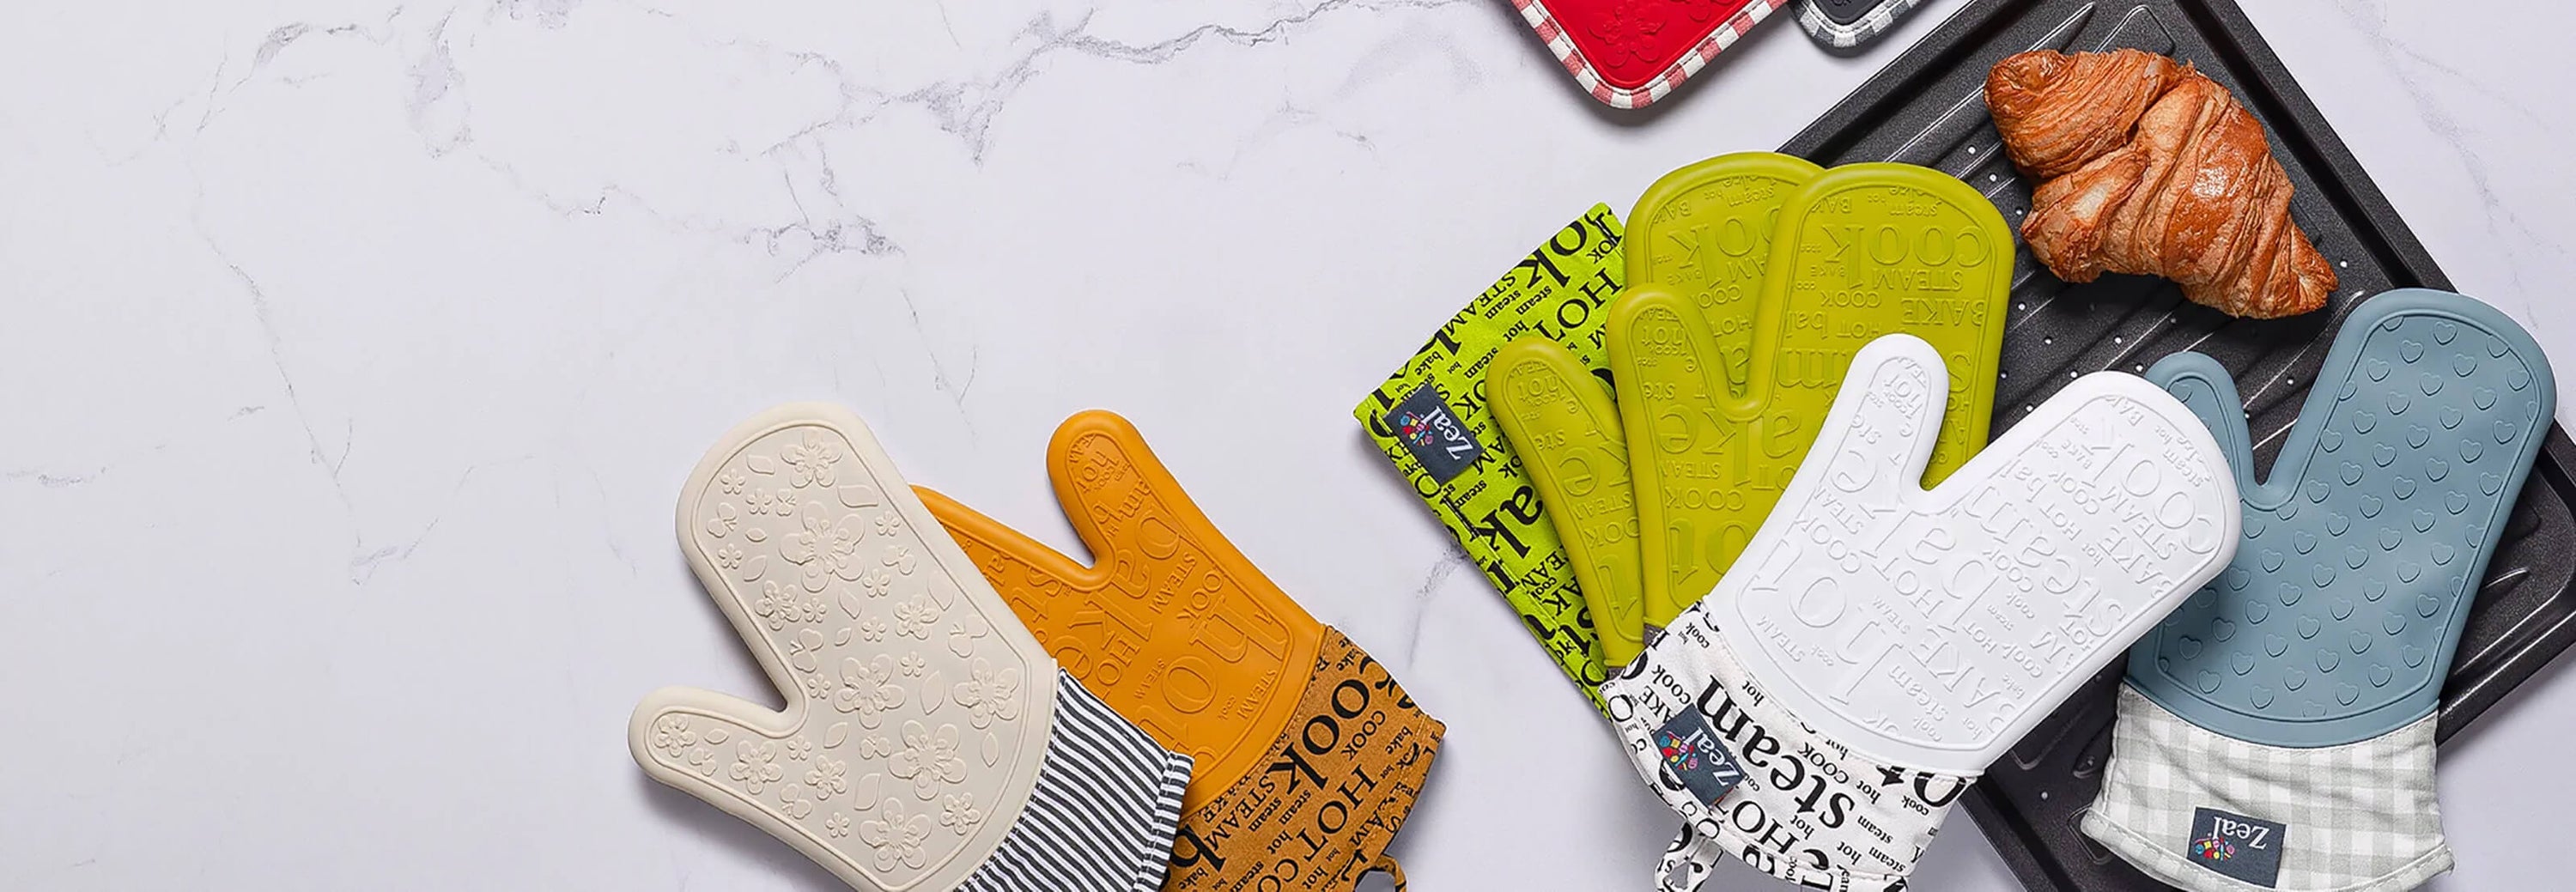 Zeal Siicone and Fabric Oven Gloves